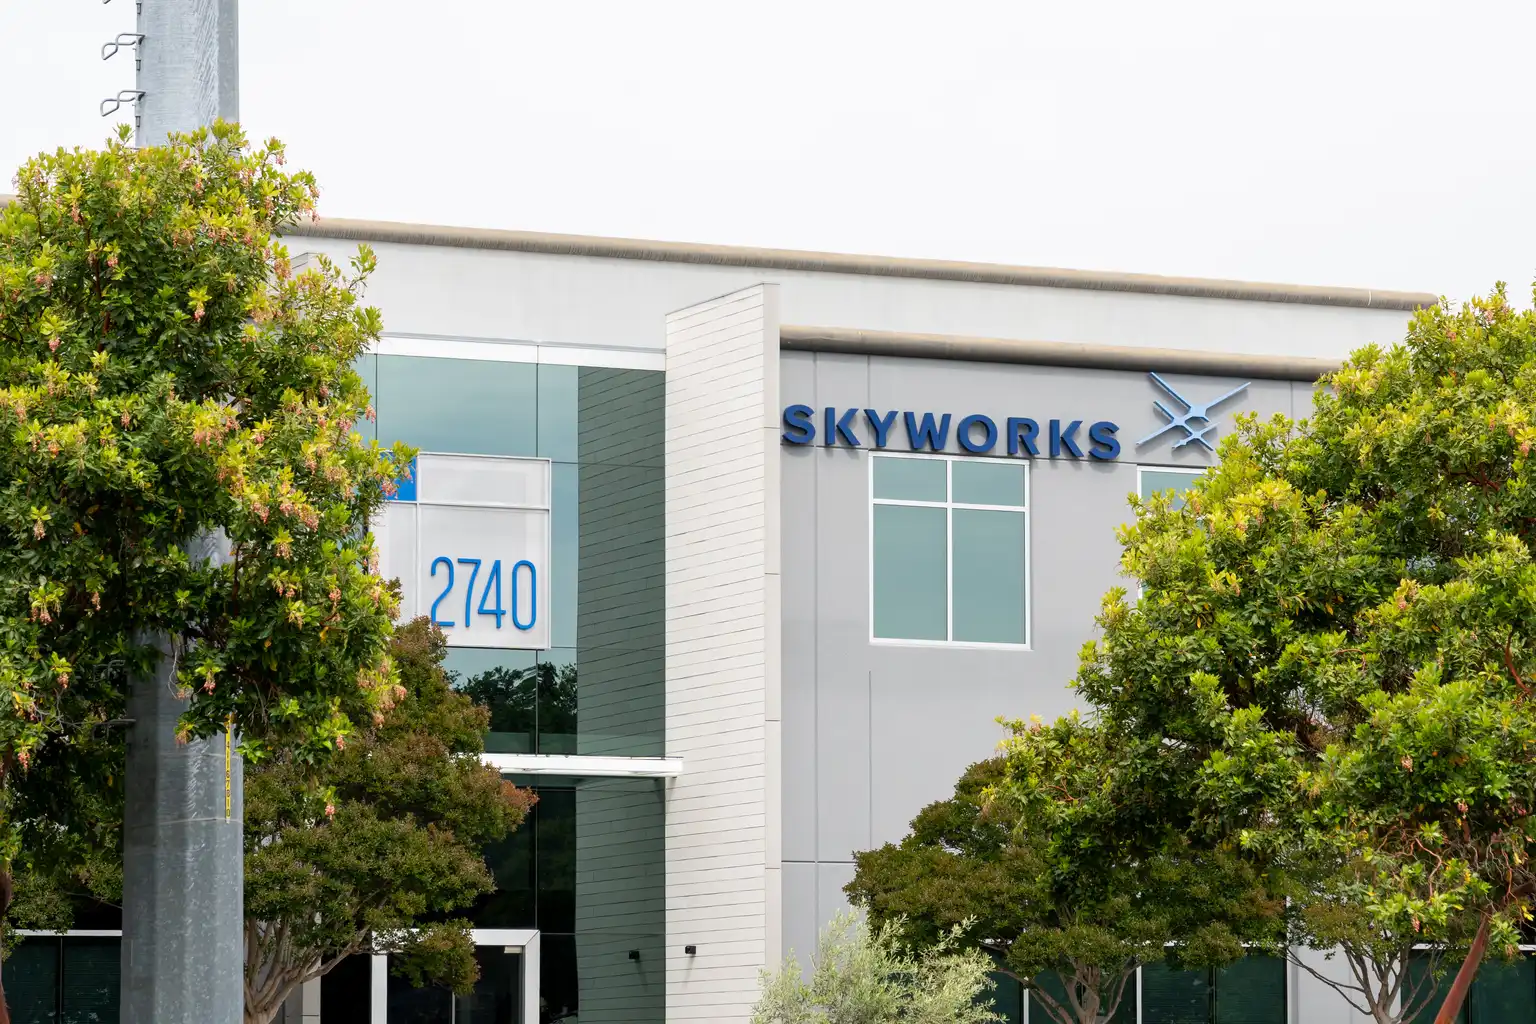 Skyworks: Acquisitions Could Be Key To Long-Term Growth - Seeking Alpha